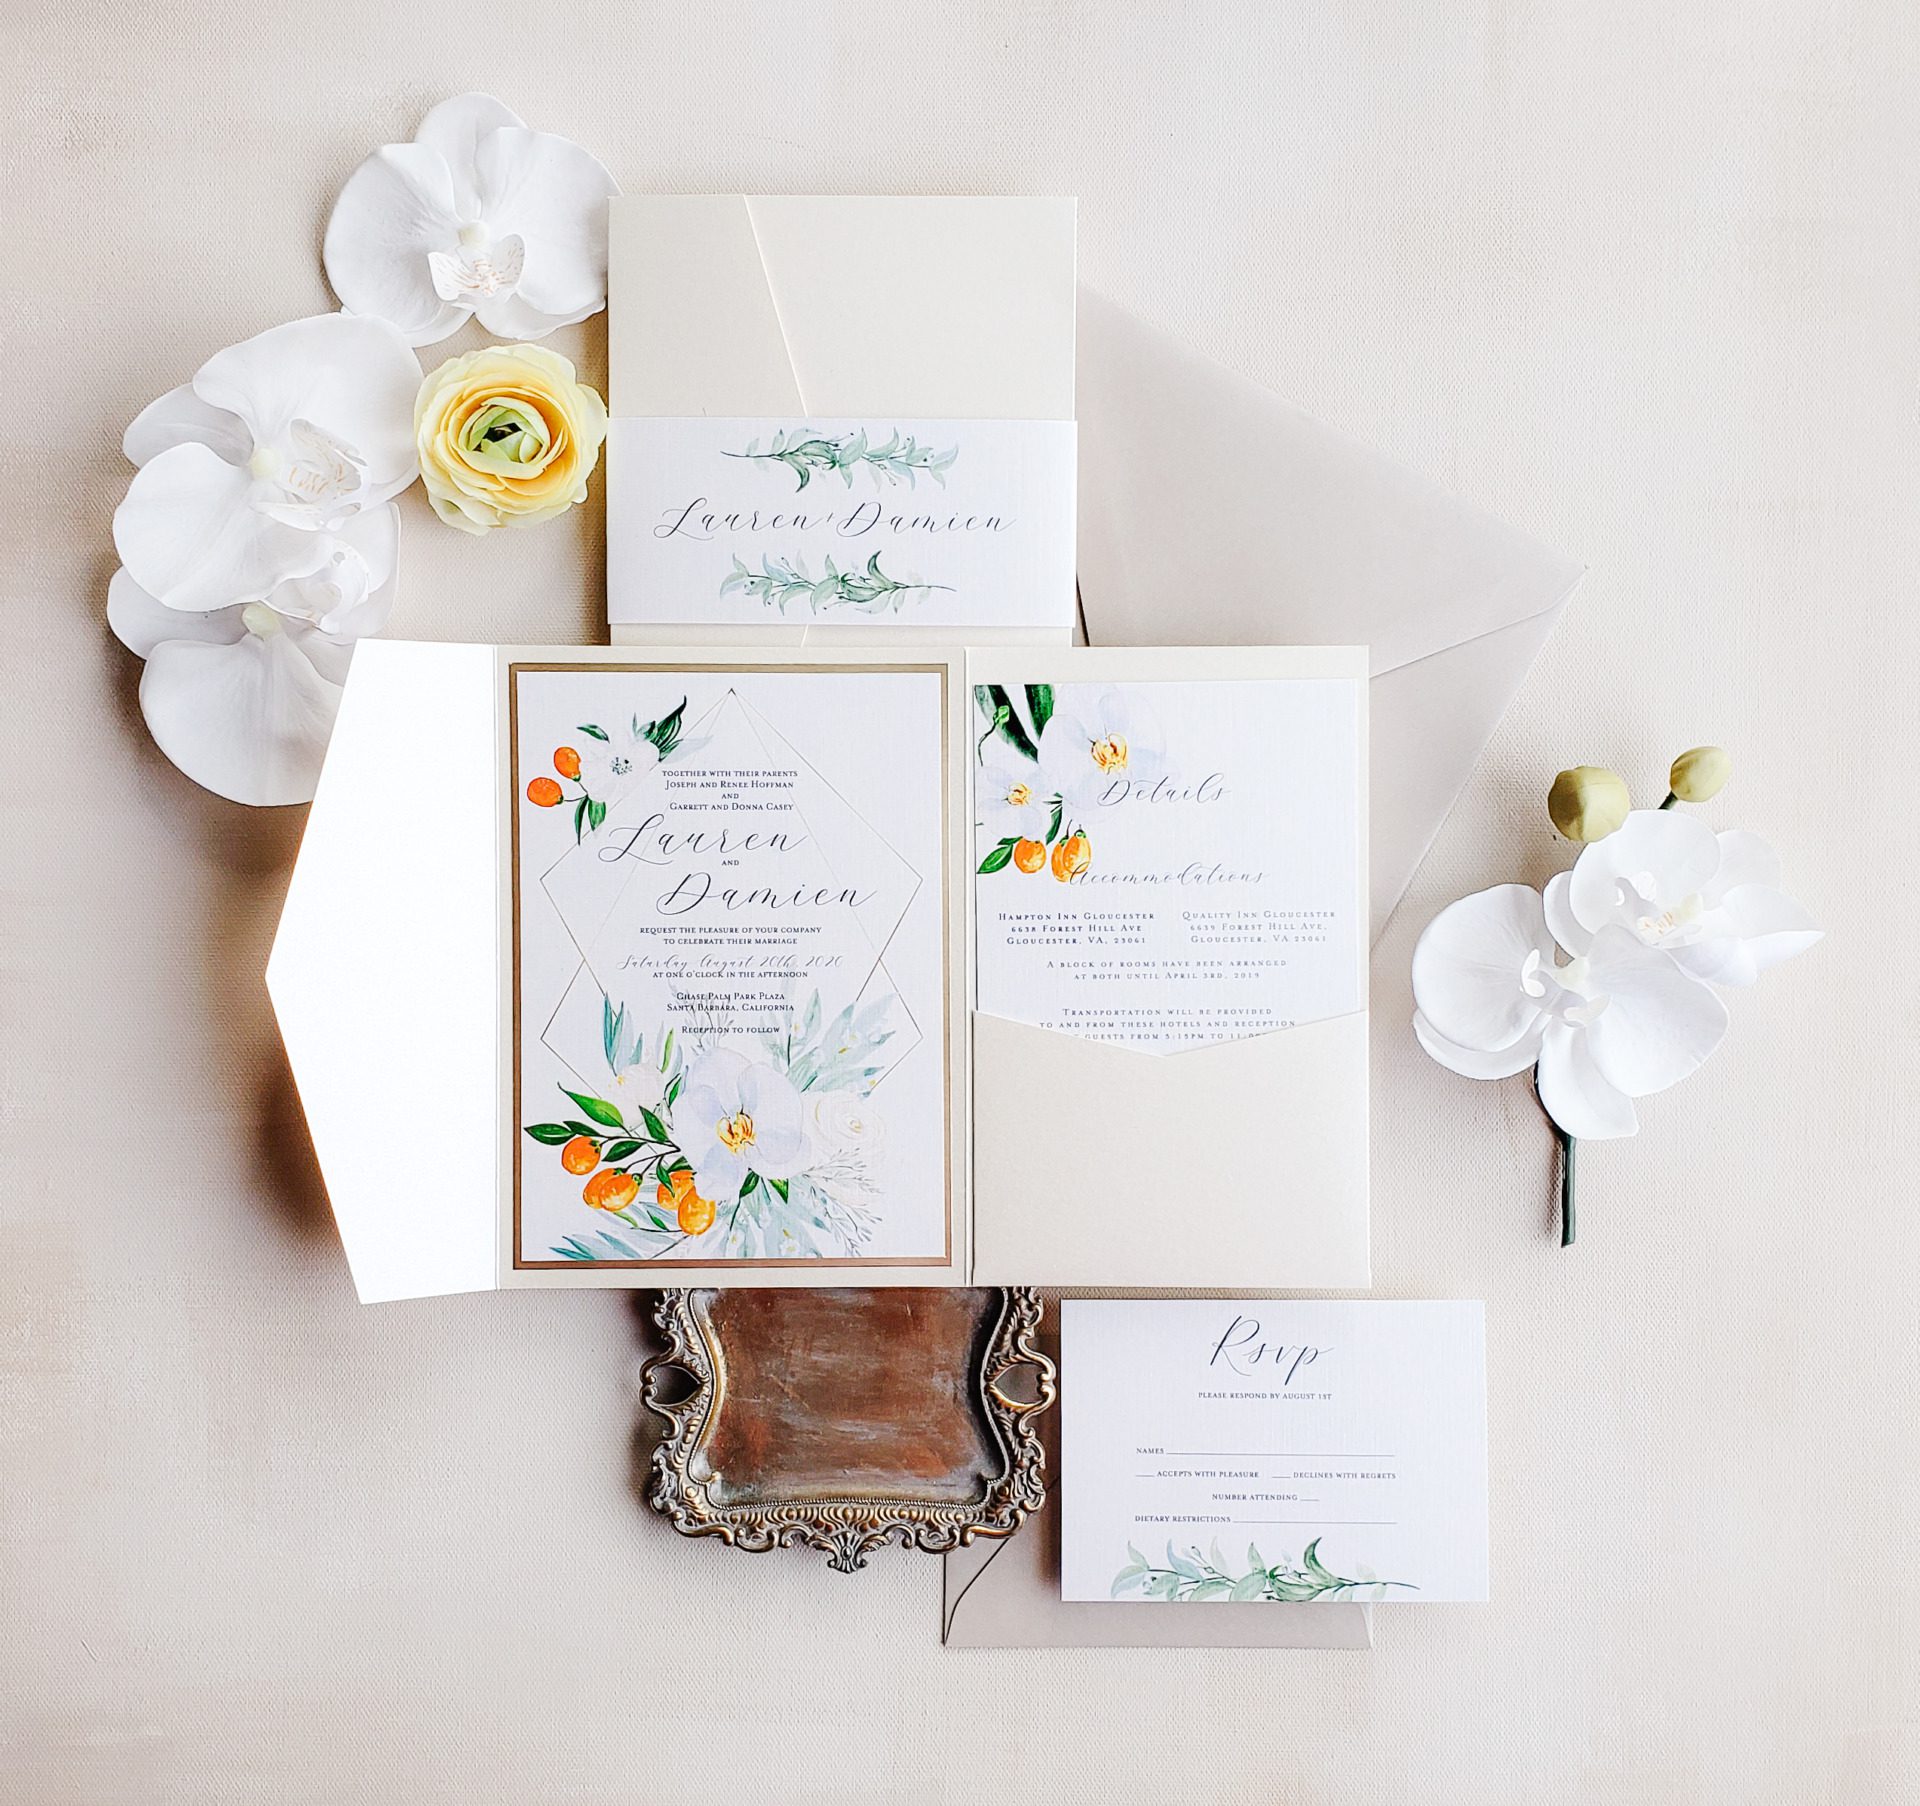 [vc_row][vc_column][vc_column_text]Purchase this listing to get a sample of our Mesa wedding invitation suite.

The sample includes:

• 5.25